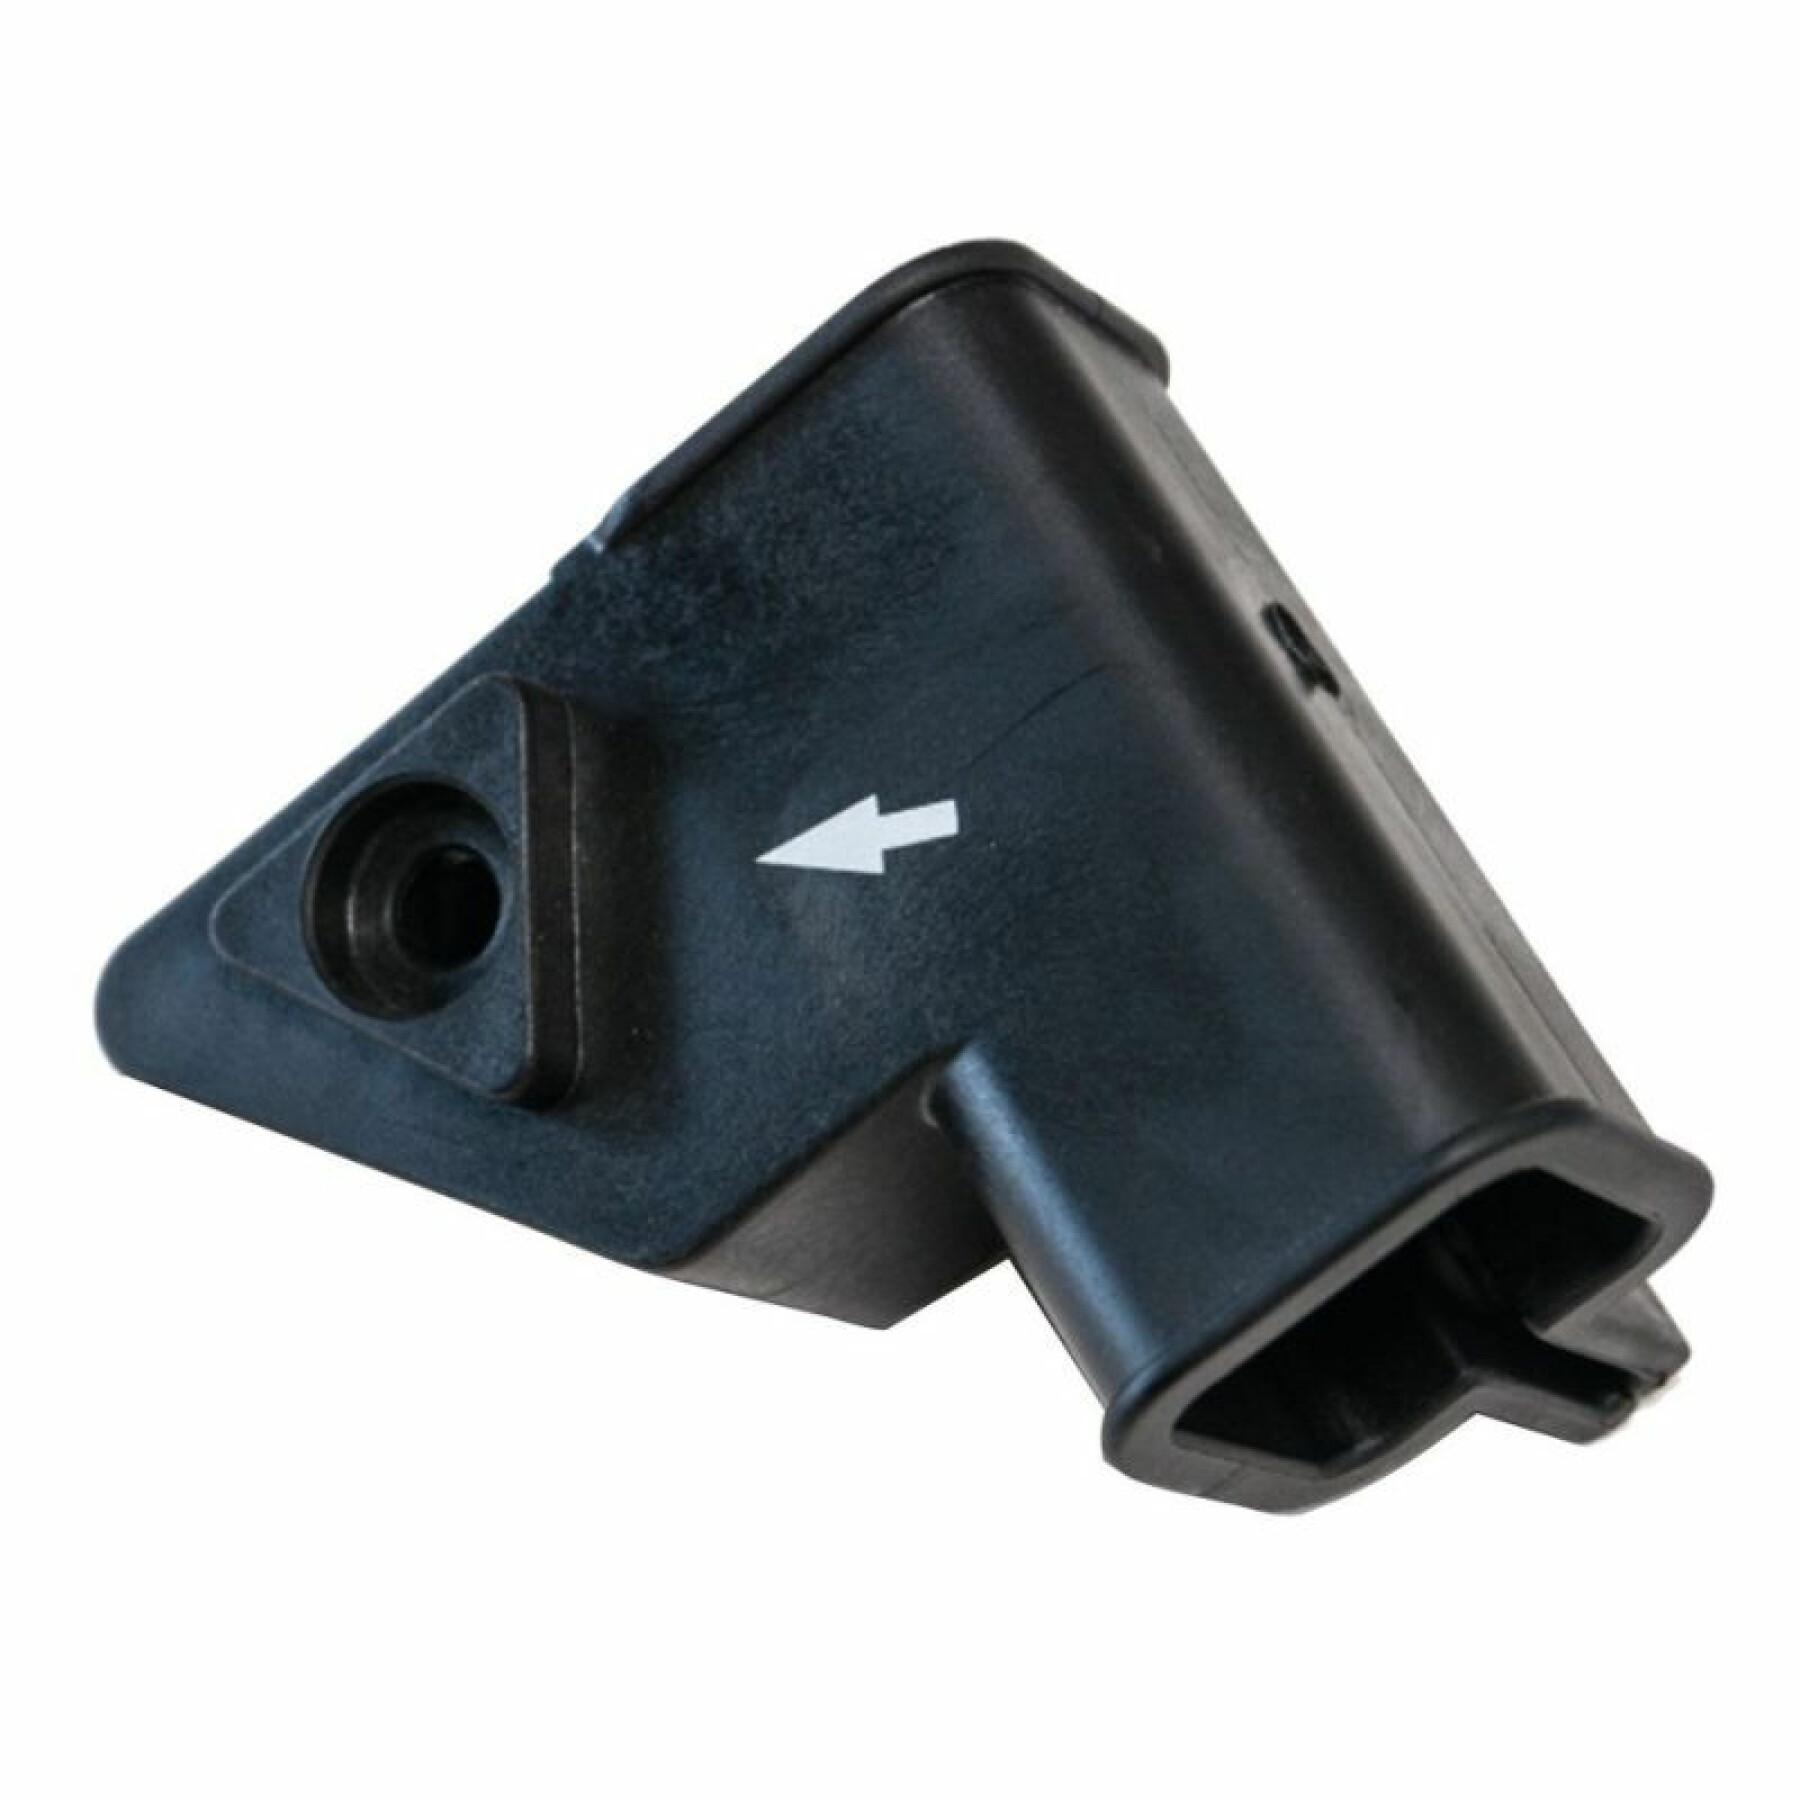 Plastic clamp for trailers Burley 2004-2014